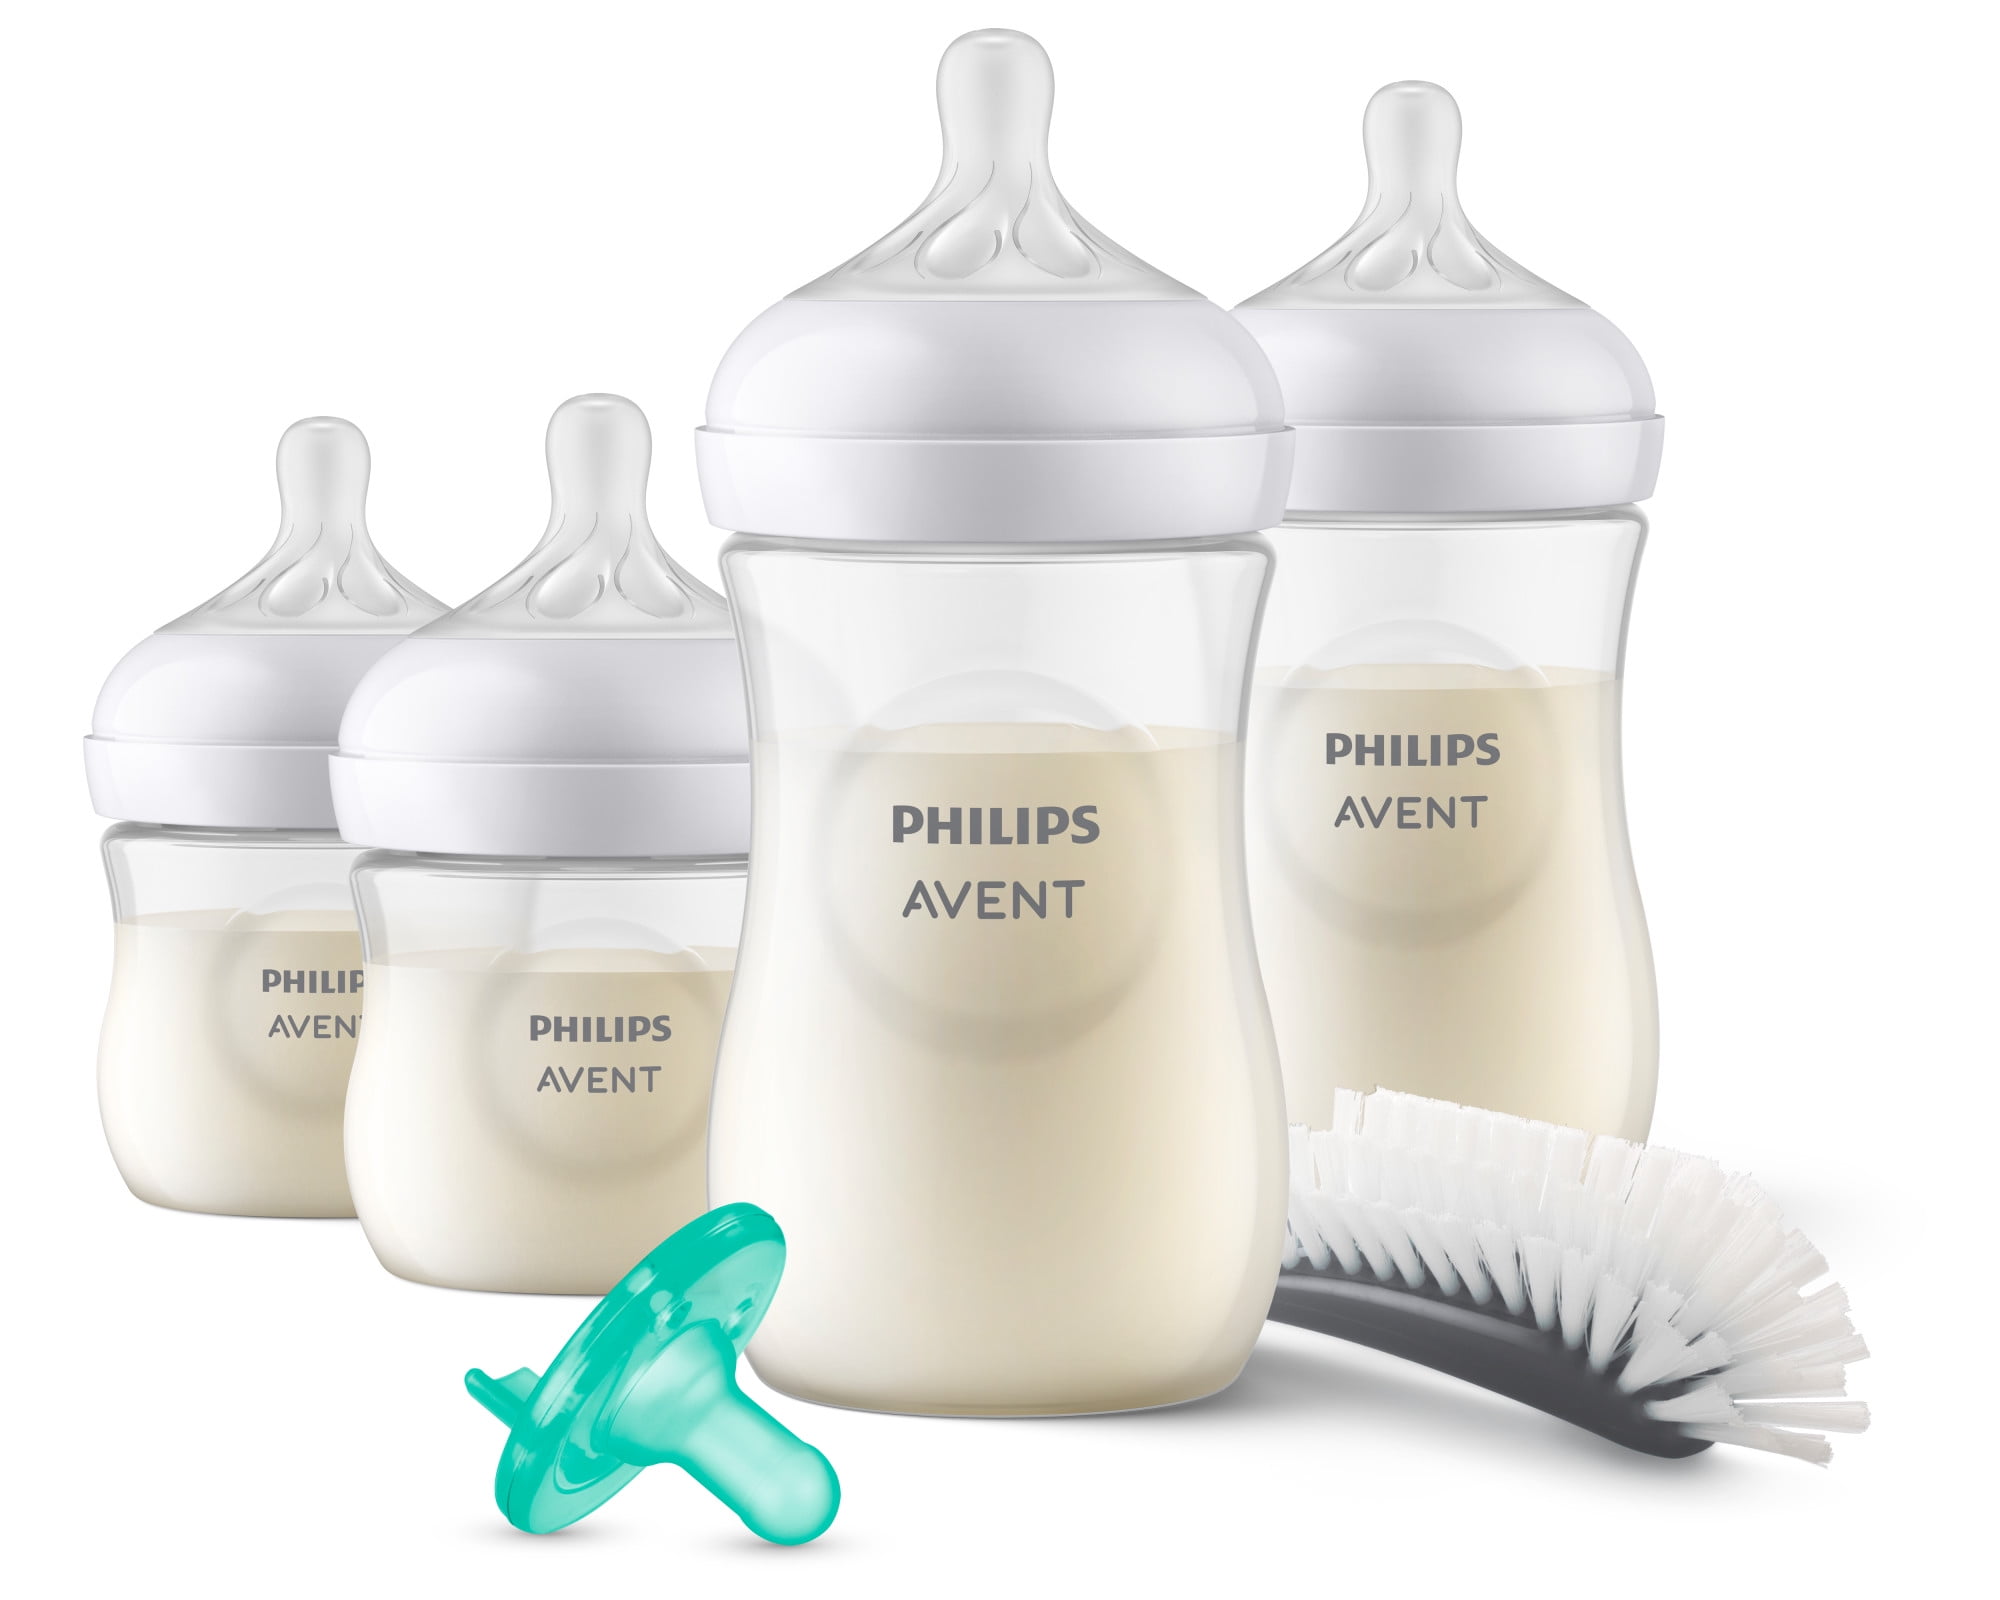 Philips Avent Avent Natural Baby Bottle With Natural Response Nipple -  Clear, 9 Oz, 3